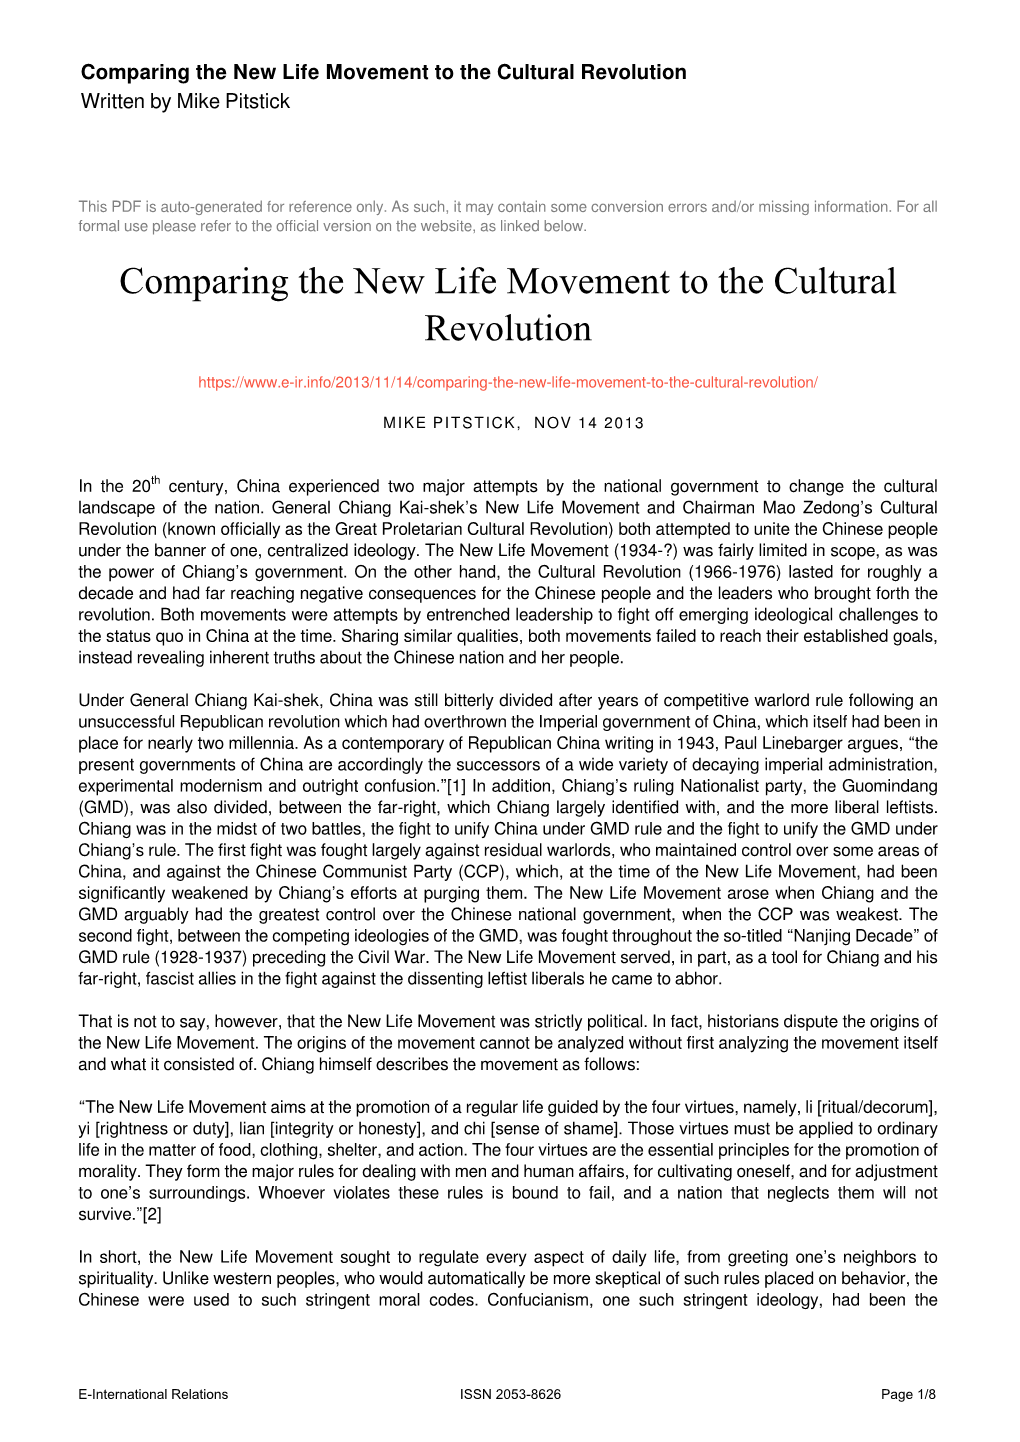 Comparing the New Life Movement to the Cultural Revolution Written by Mike Pitstick